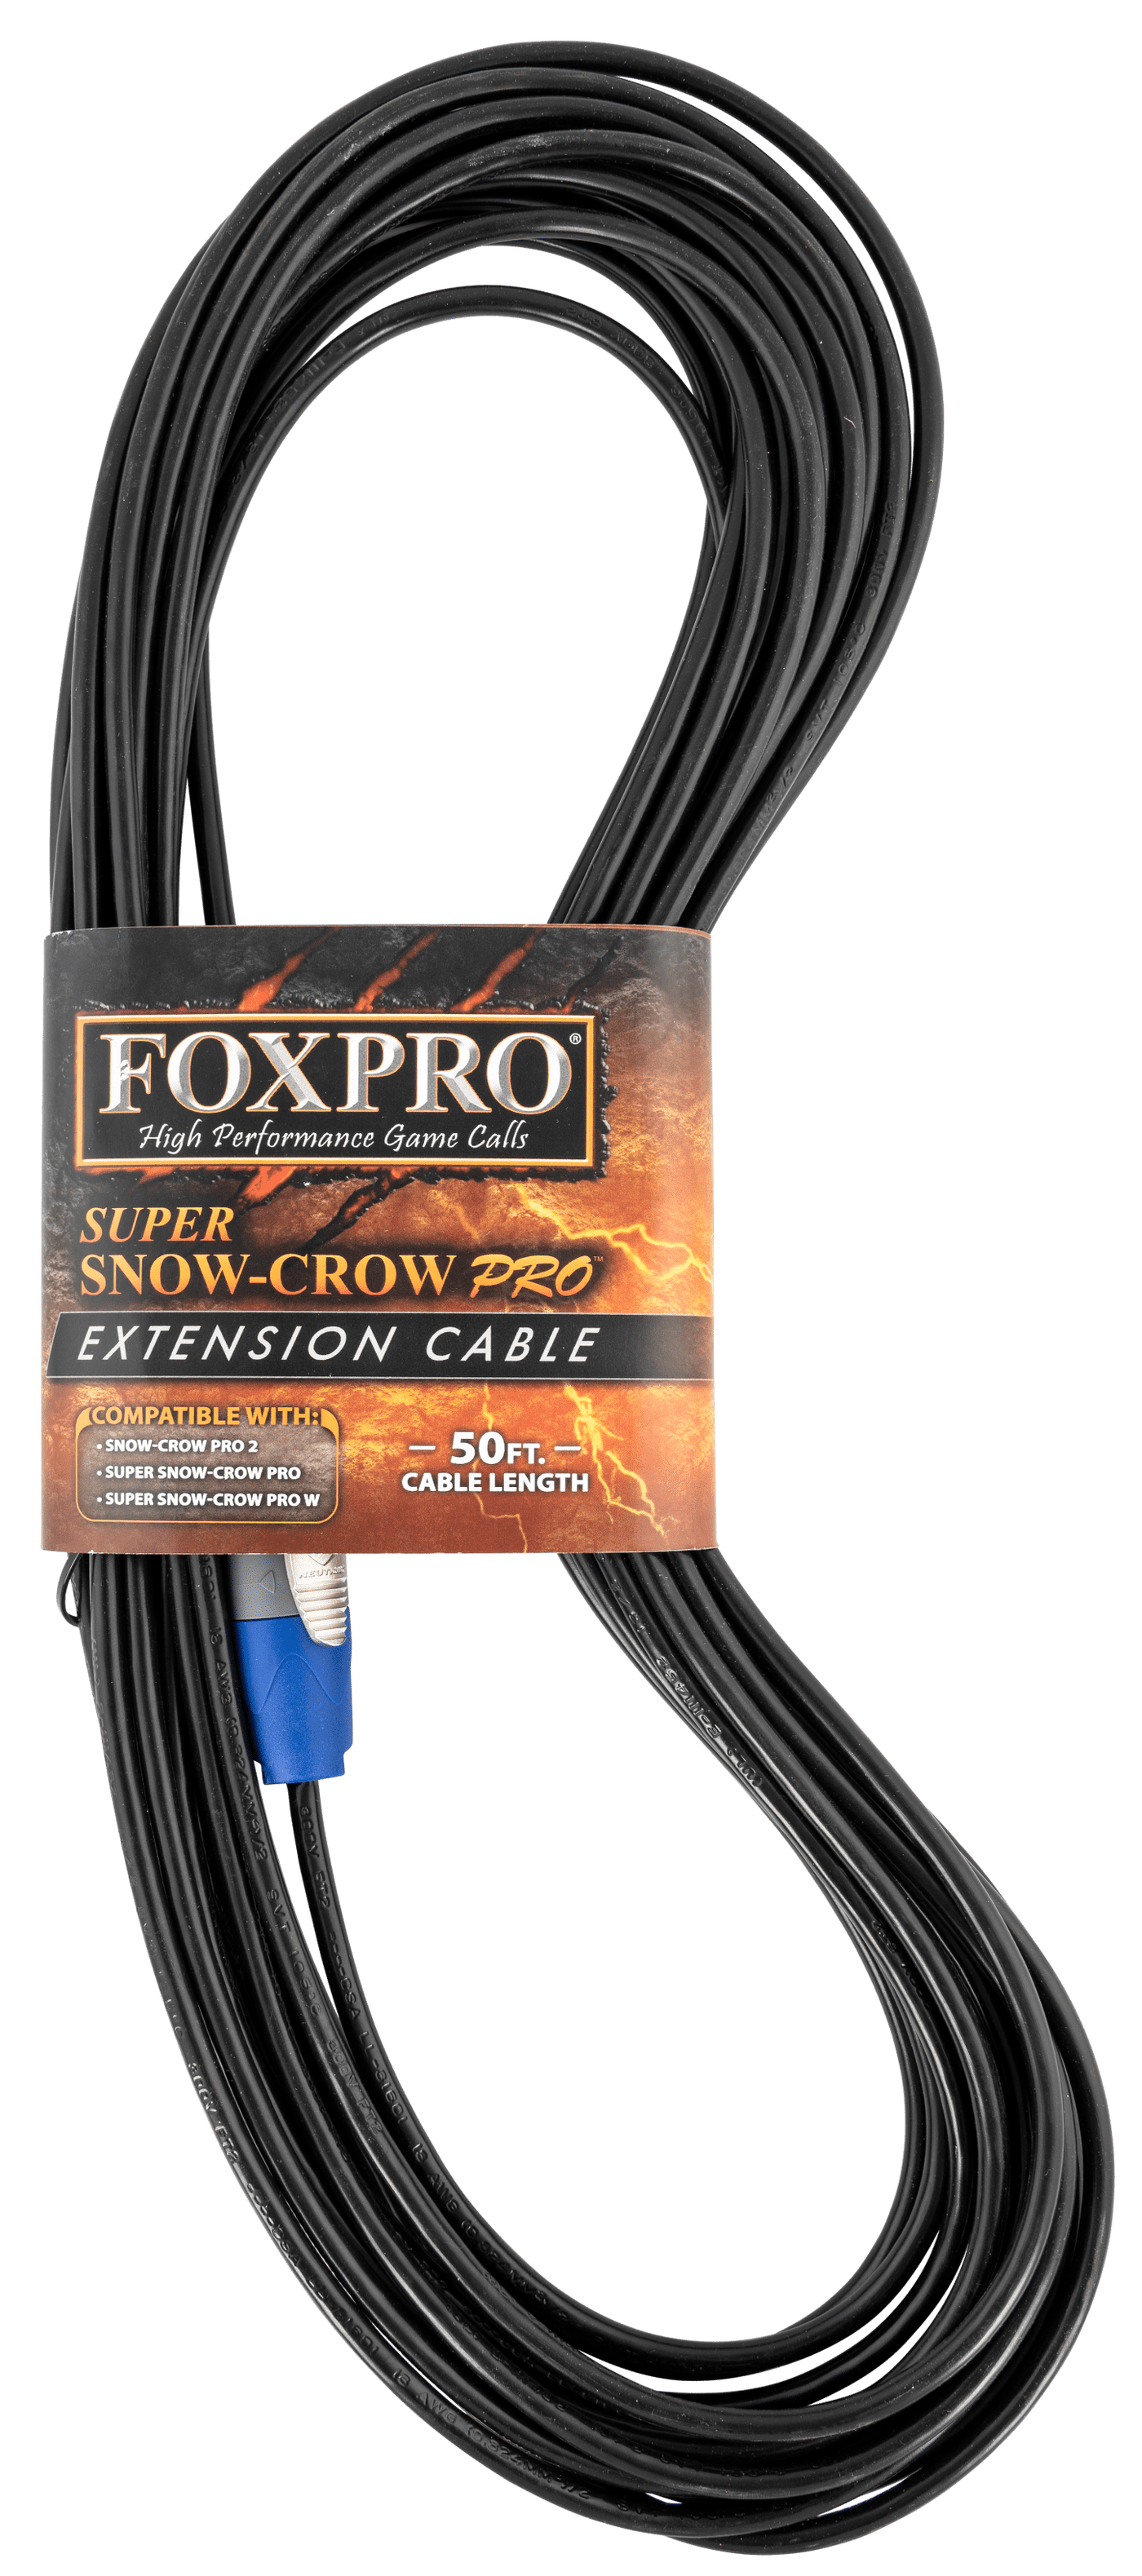 Foxpro Foxpro Extension Cable, Foxpro Cbl-50ft-scp2/sscp  50ft Ext Cable Accessories